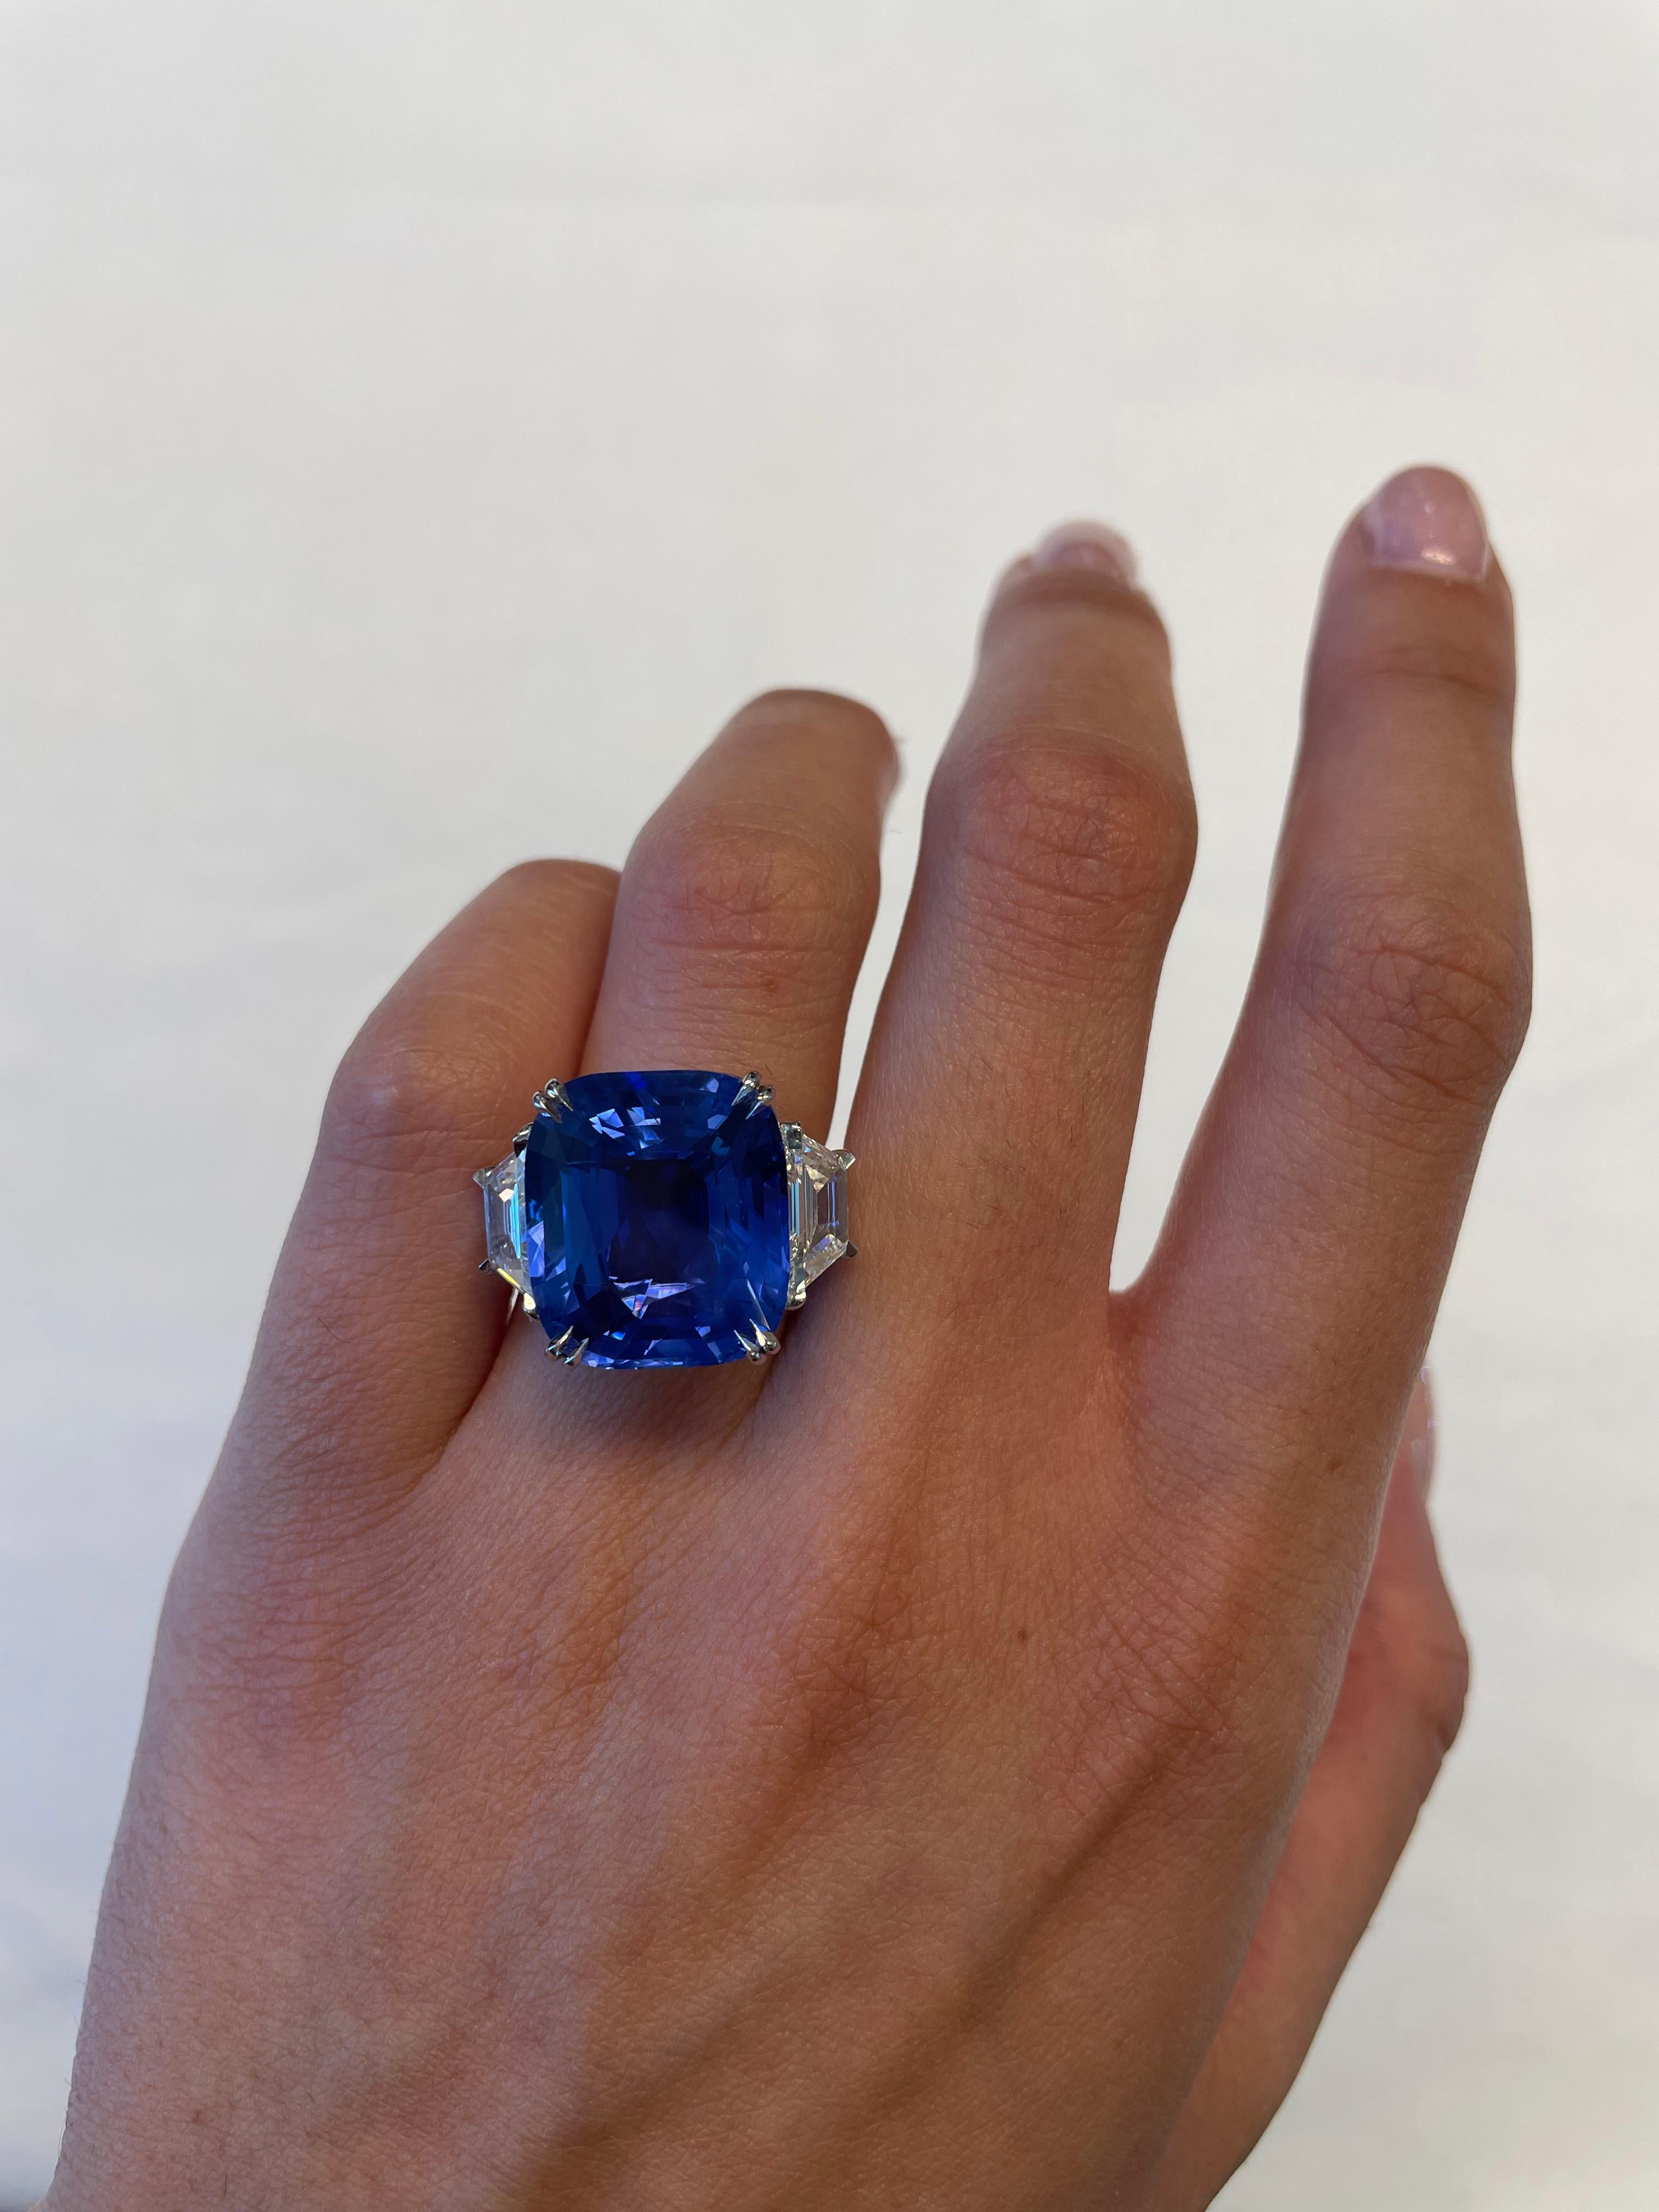 An extremely rare and important no-heat Burmese sapphire ring, GIA certified. Superbly cut with a majority of the weight at the top of the stone so it faces up bigger than the typical 19ct sapphire. Truly a stone of exceptional quality, one that is